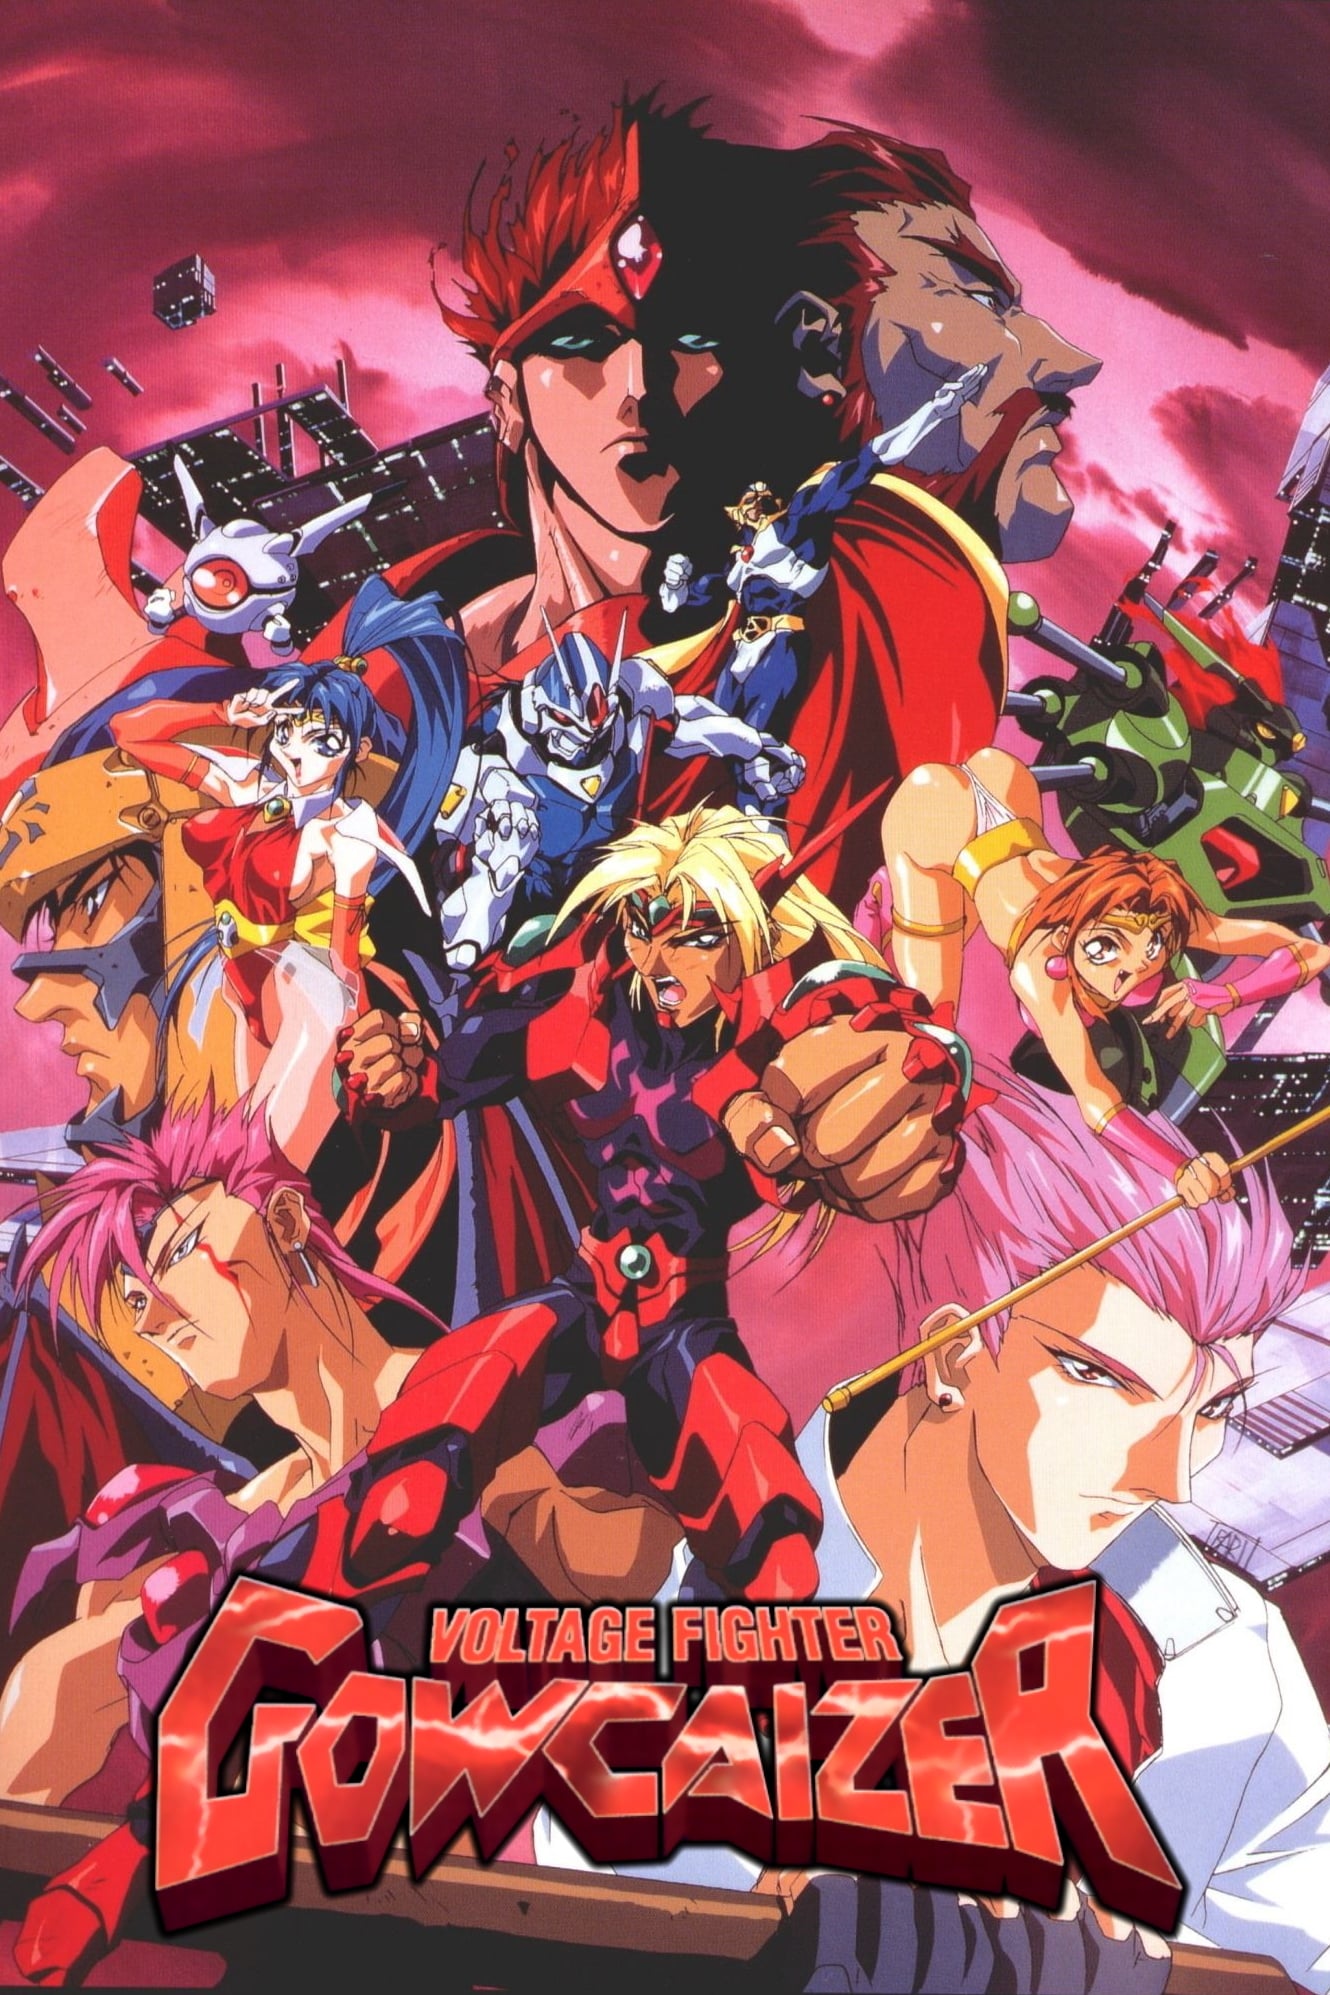 Voltage Fighter Gowcaizer (1996)